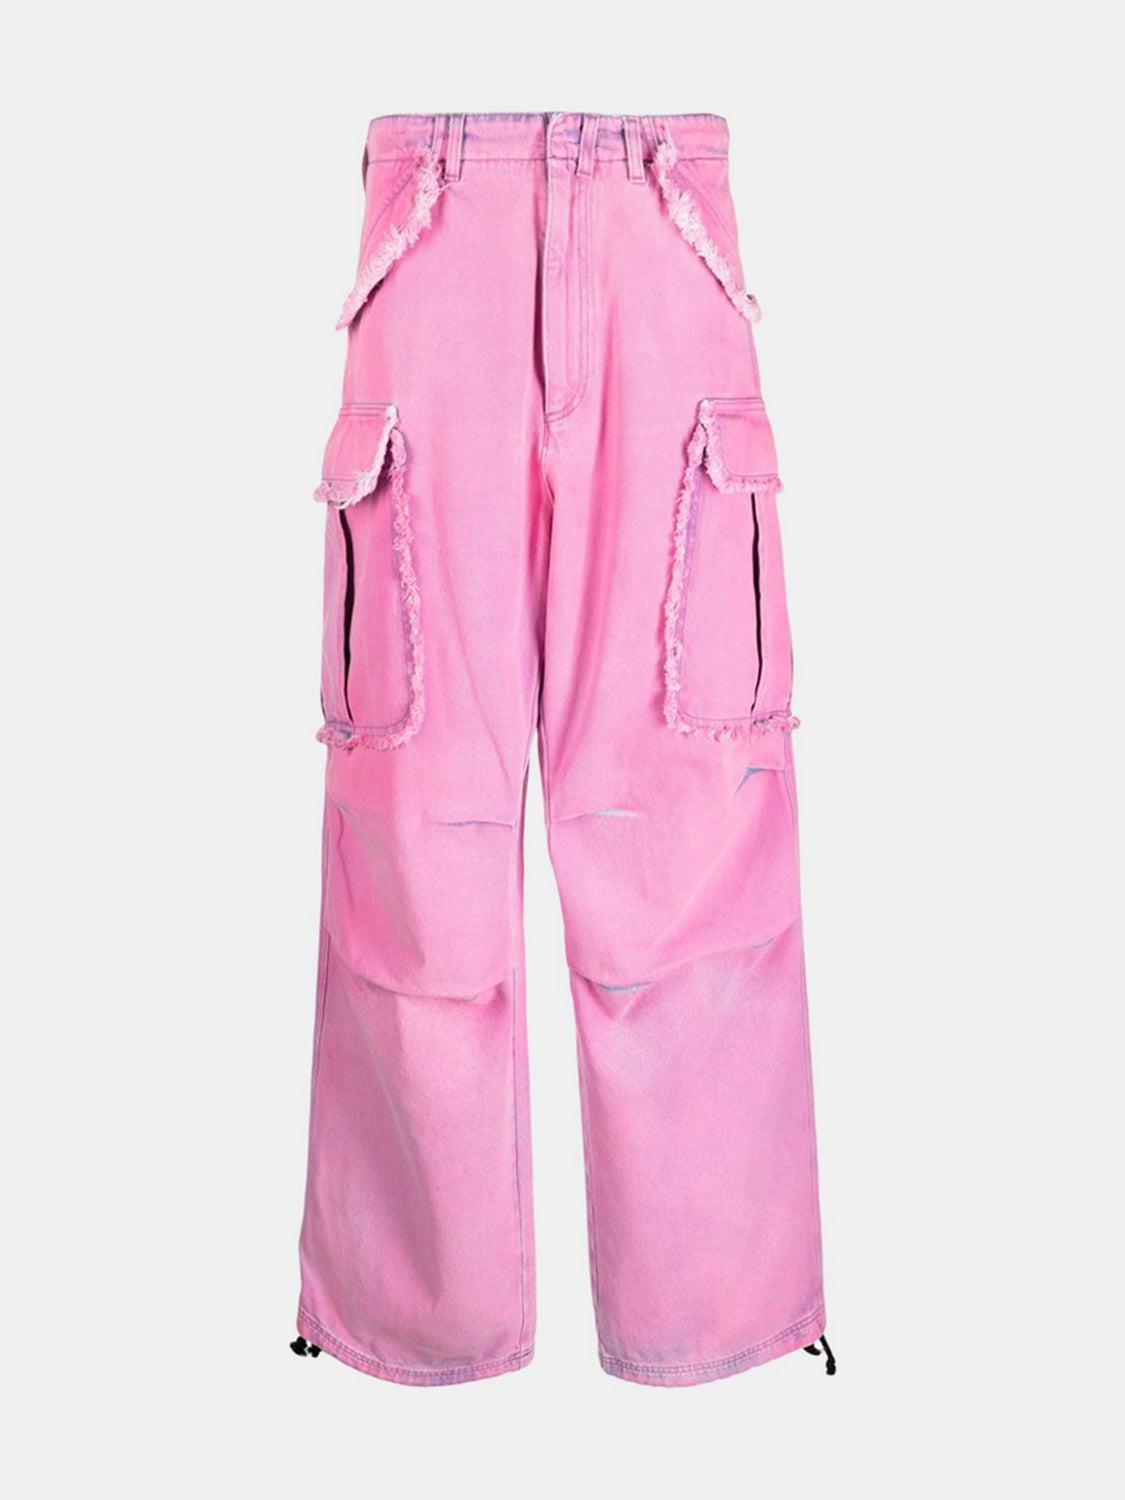 a pair of pink pants with a white background